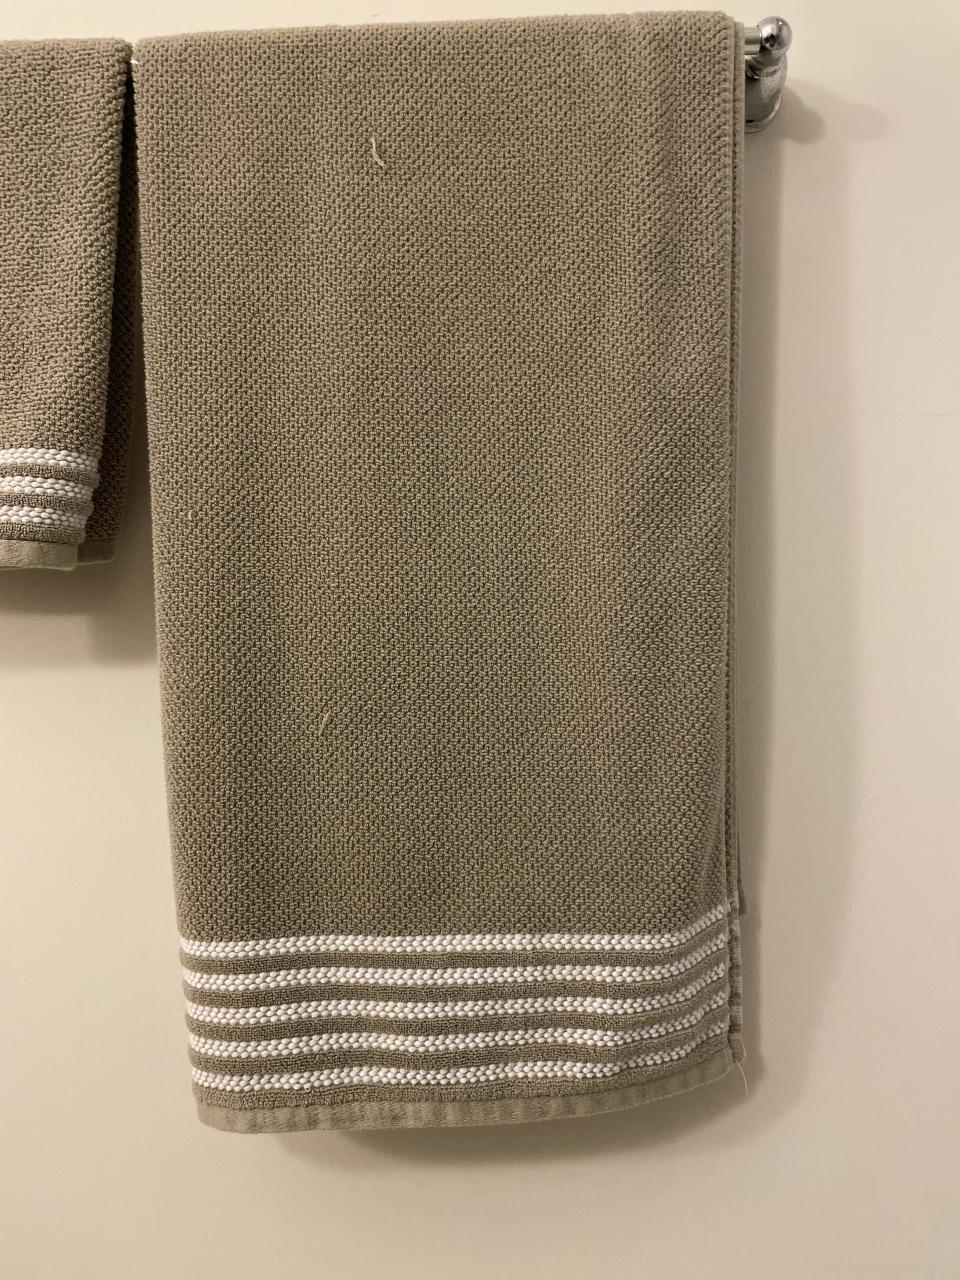 Beige towel hanging on a rack with decorative white stripes at the bottom